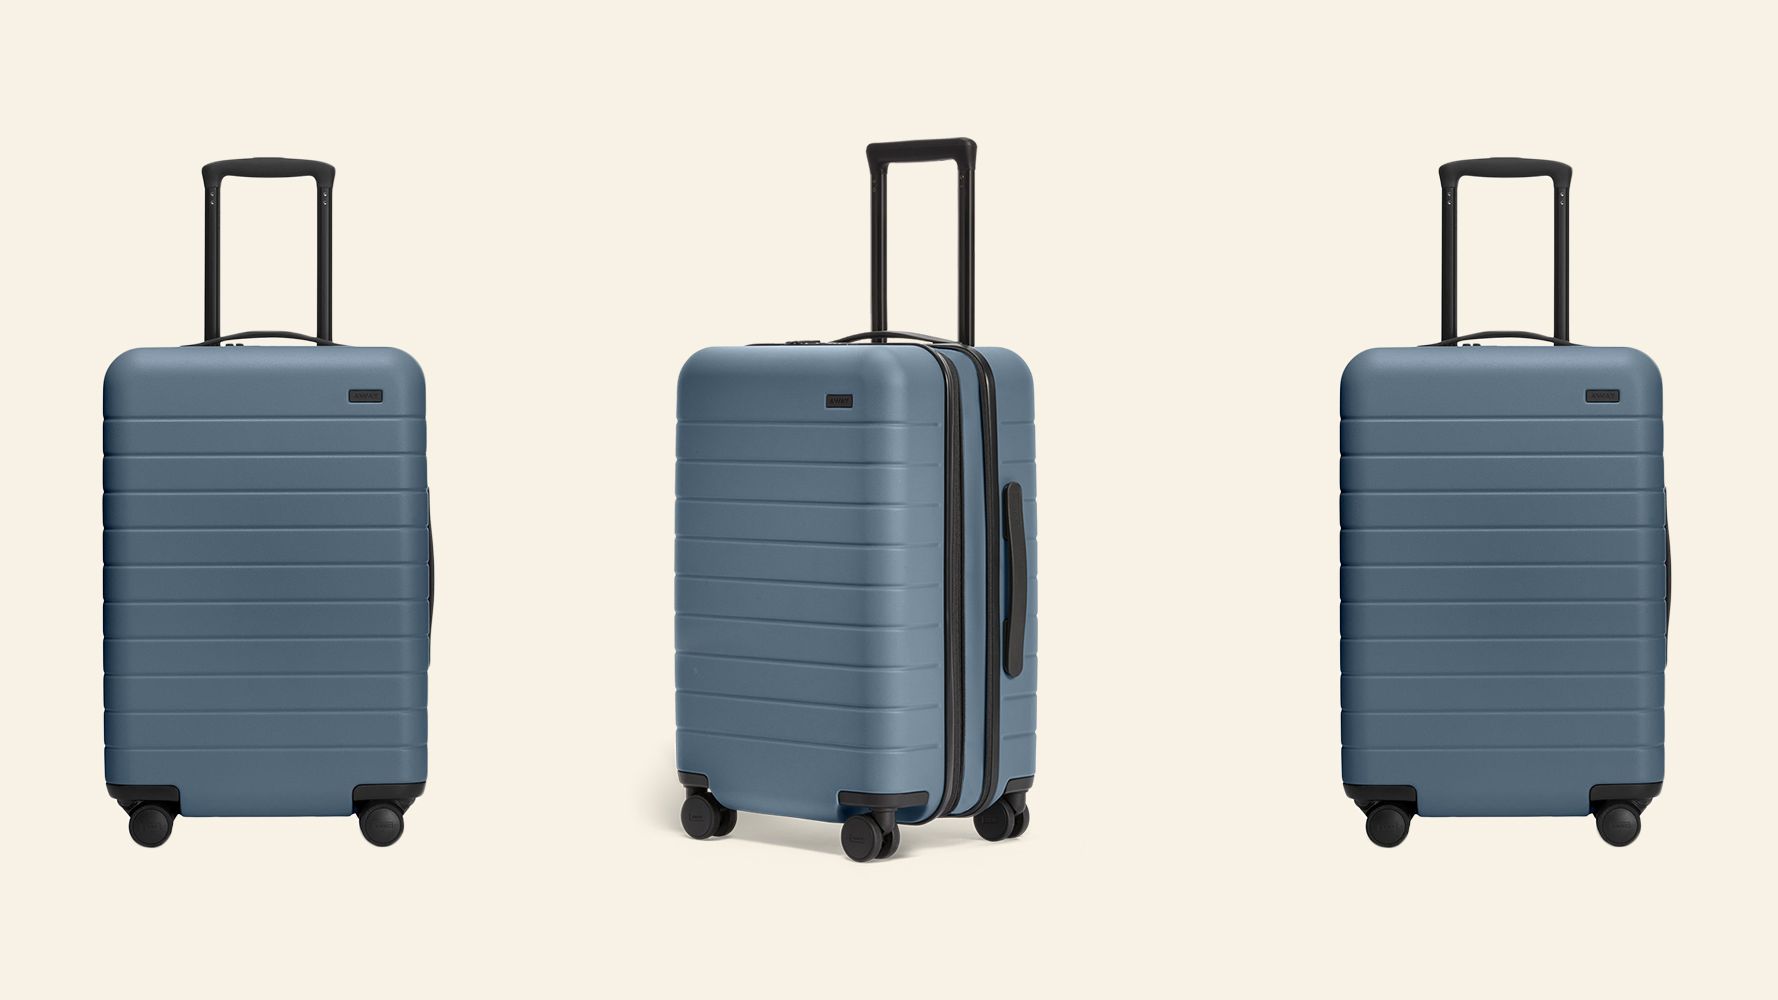 I love suitcases, I guess because they represent traveling in some